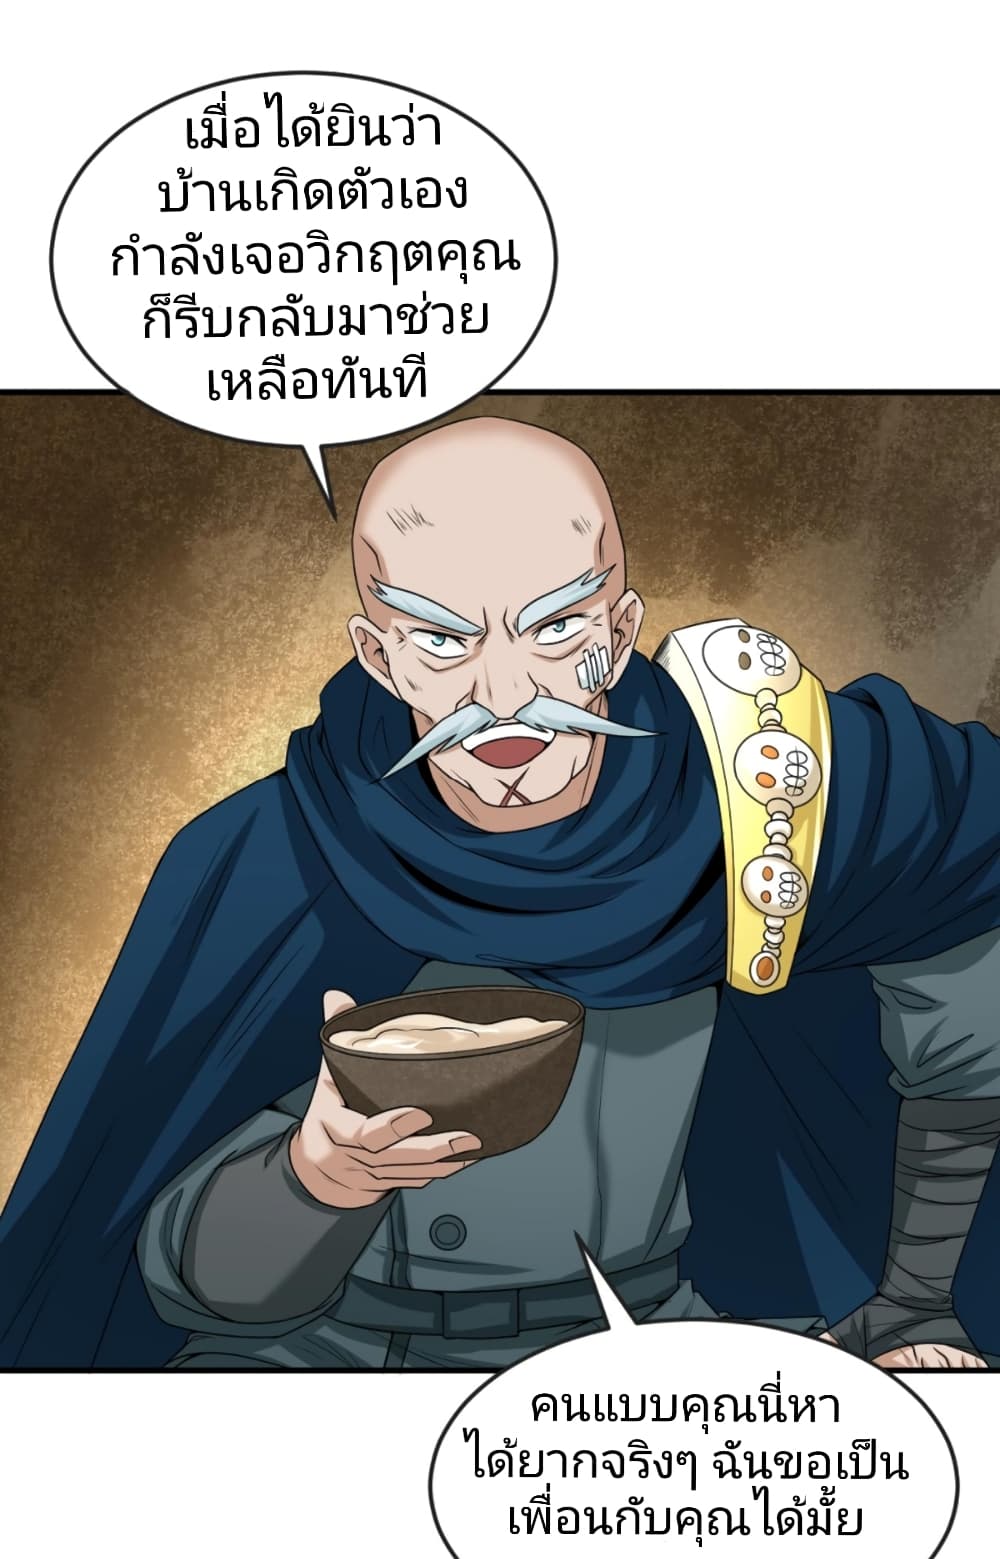 The Age of Ghost Spirits à¸à¸­à¸à¸à¸µà¹ 29 (21)